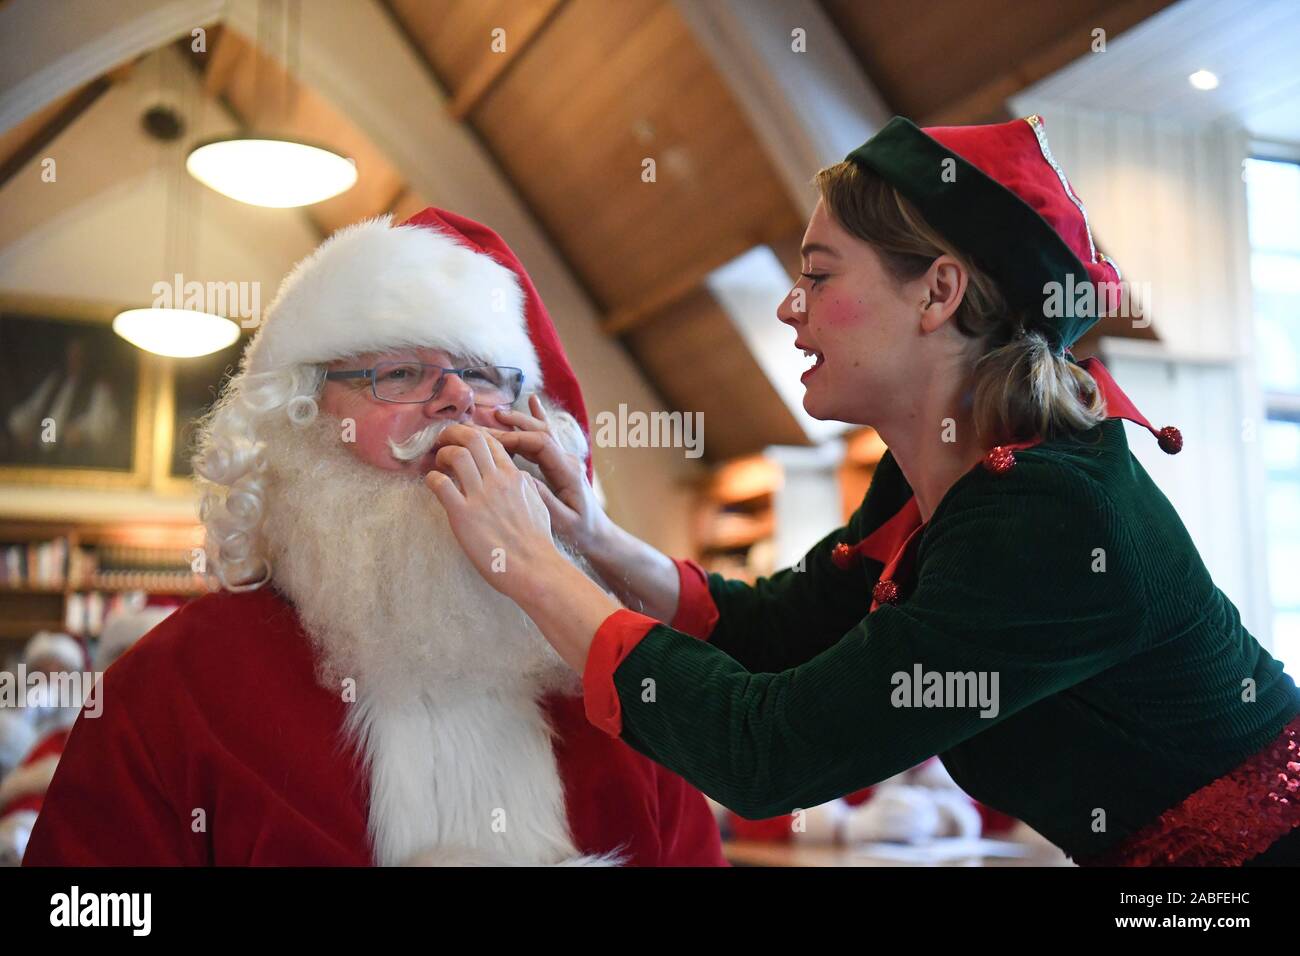 An elf adjusts a Father Christmas performer's moustache in a classroom during the 23rd annual Santa School at Southwark Cathedral in London. Stock Photo